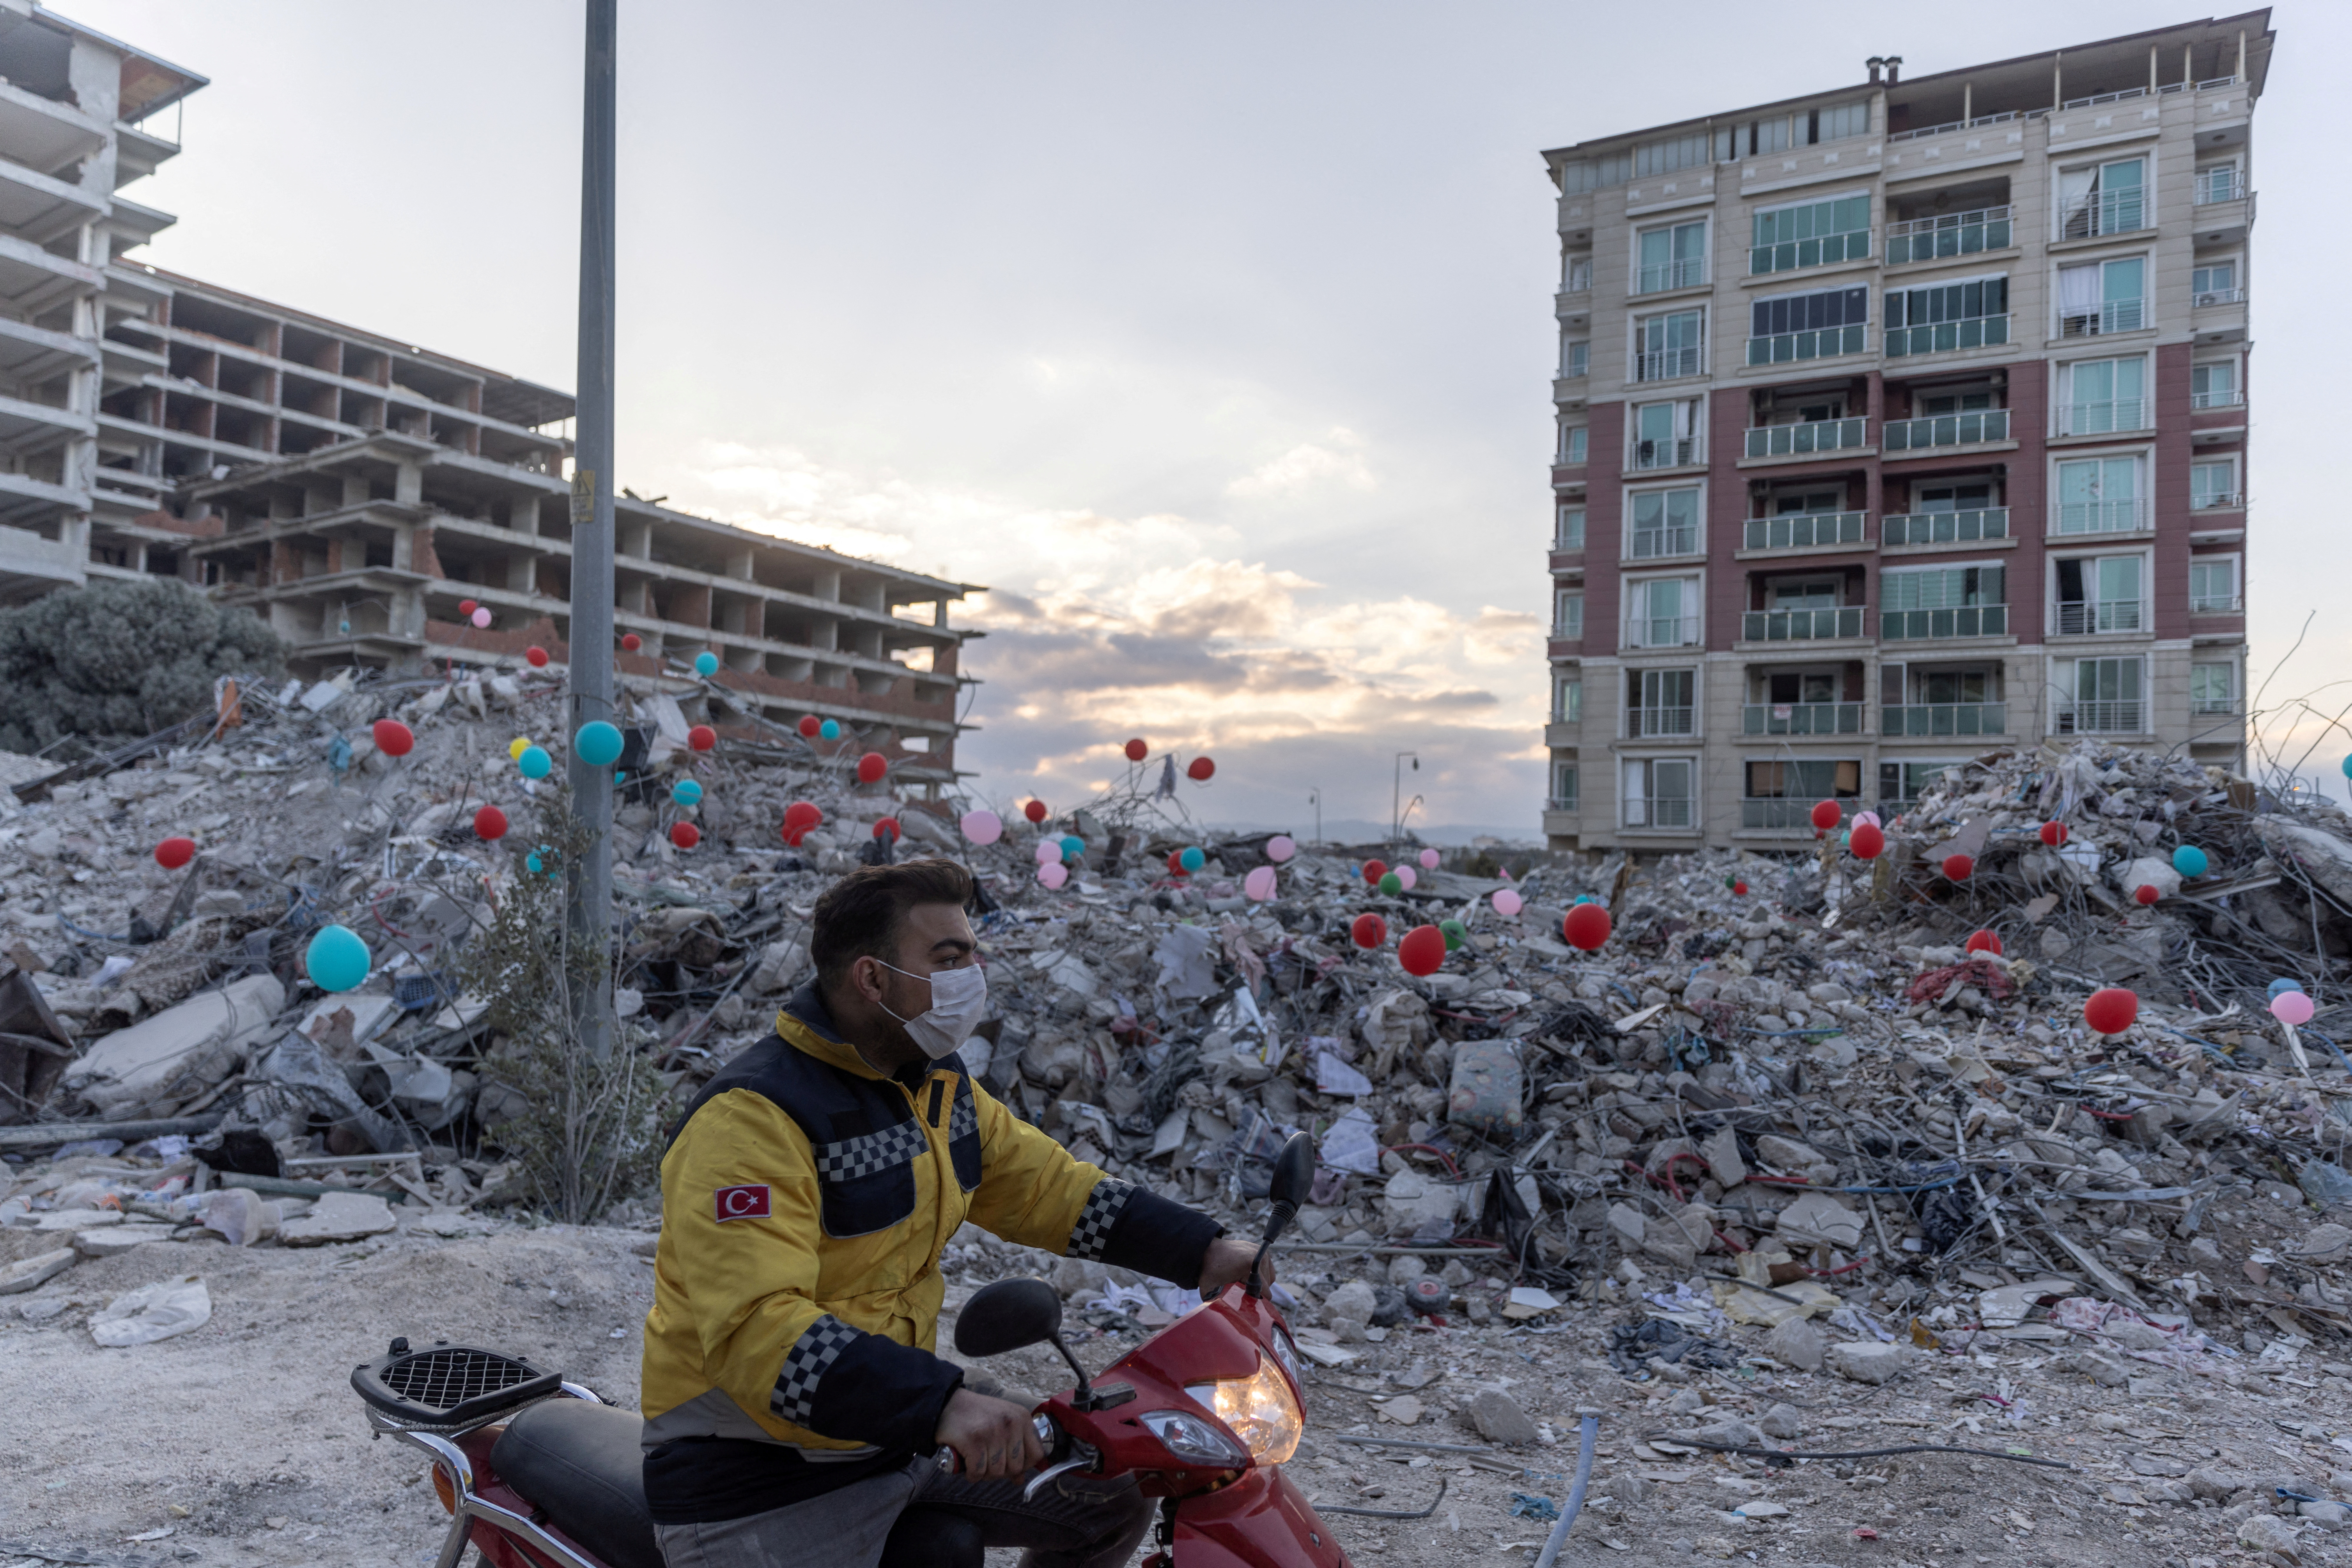 Aftermath of the deadly earthquake in Turkey